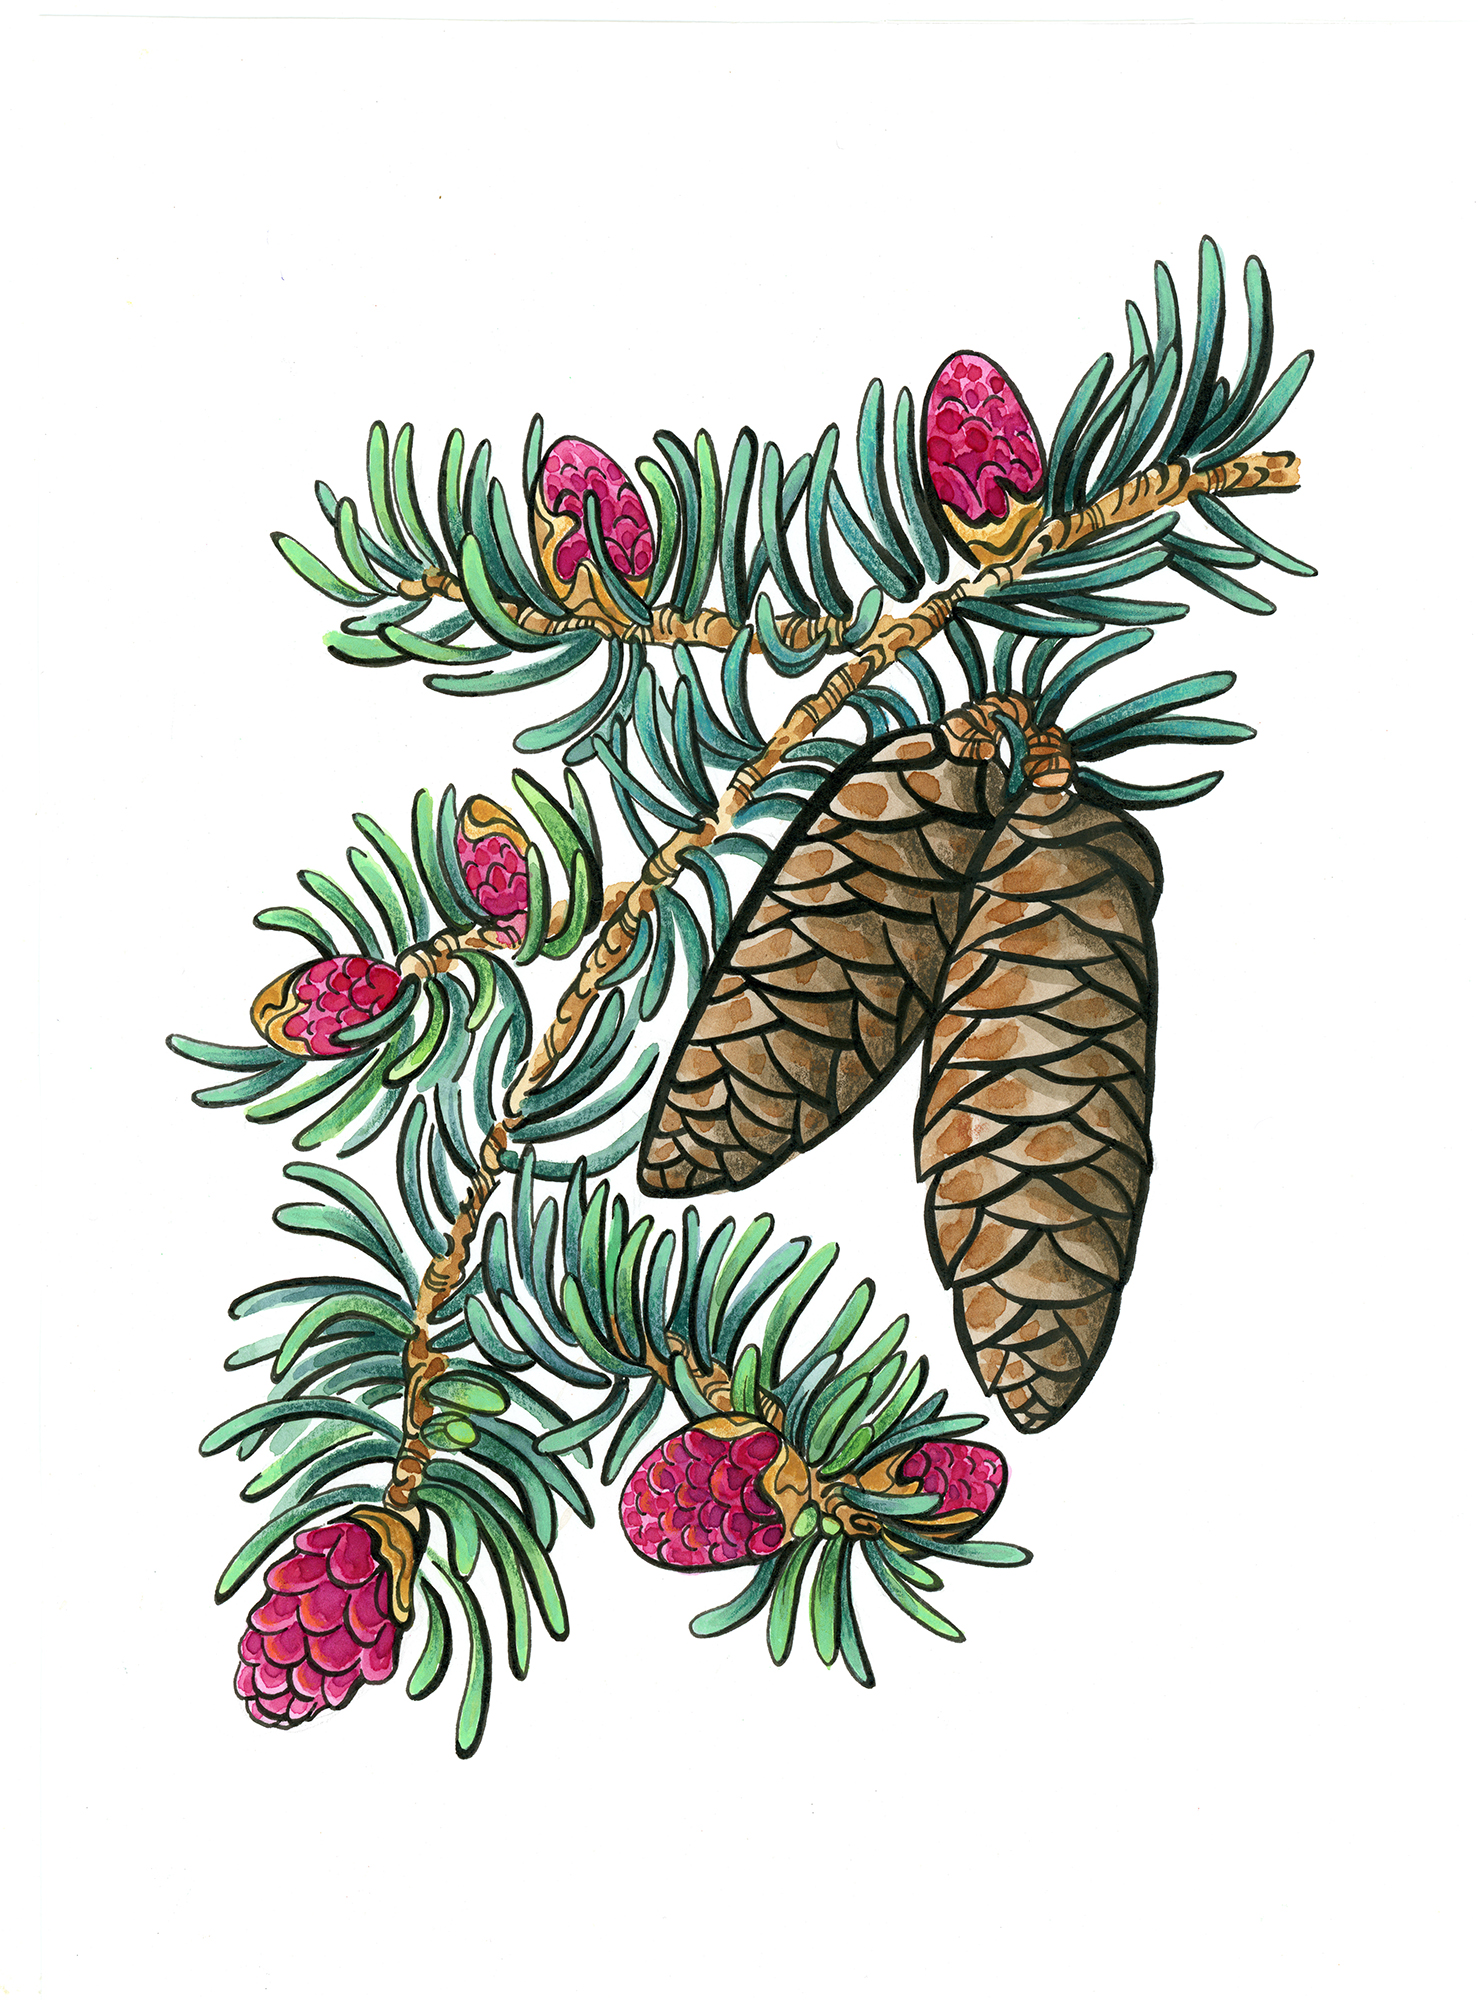 Illustration of large and small pine cones.